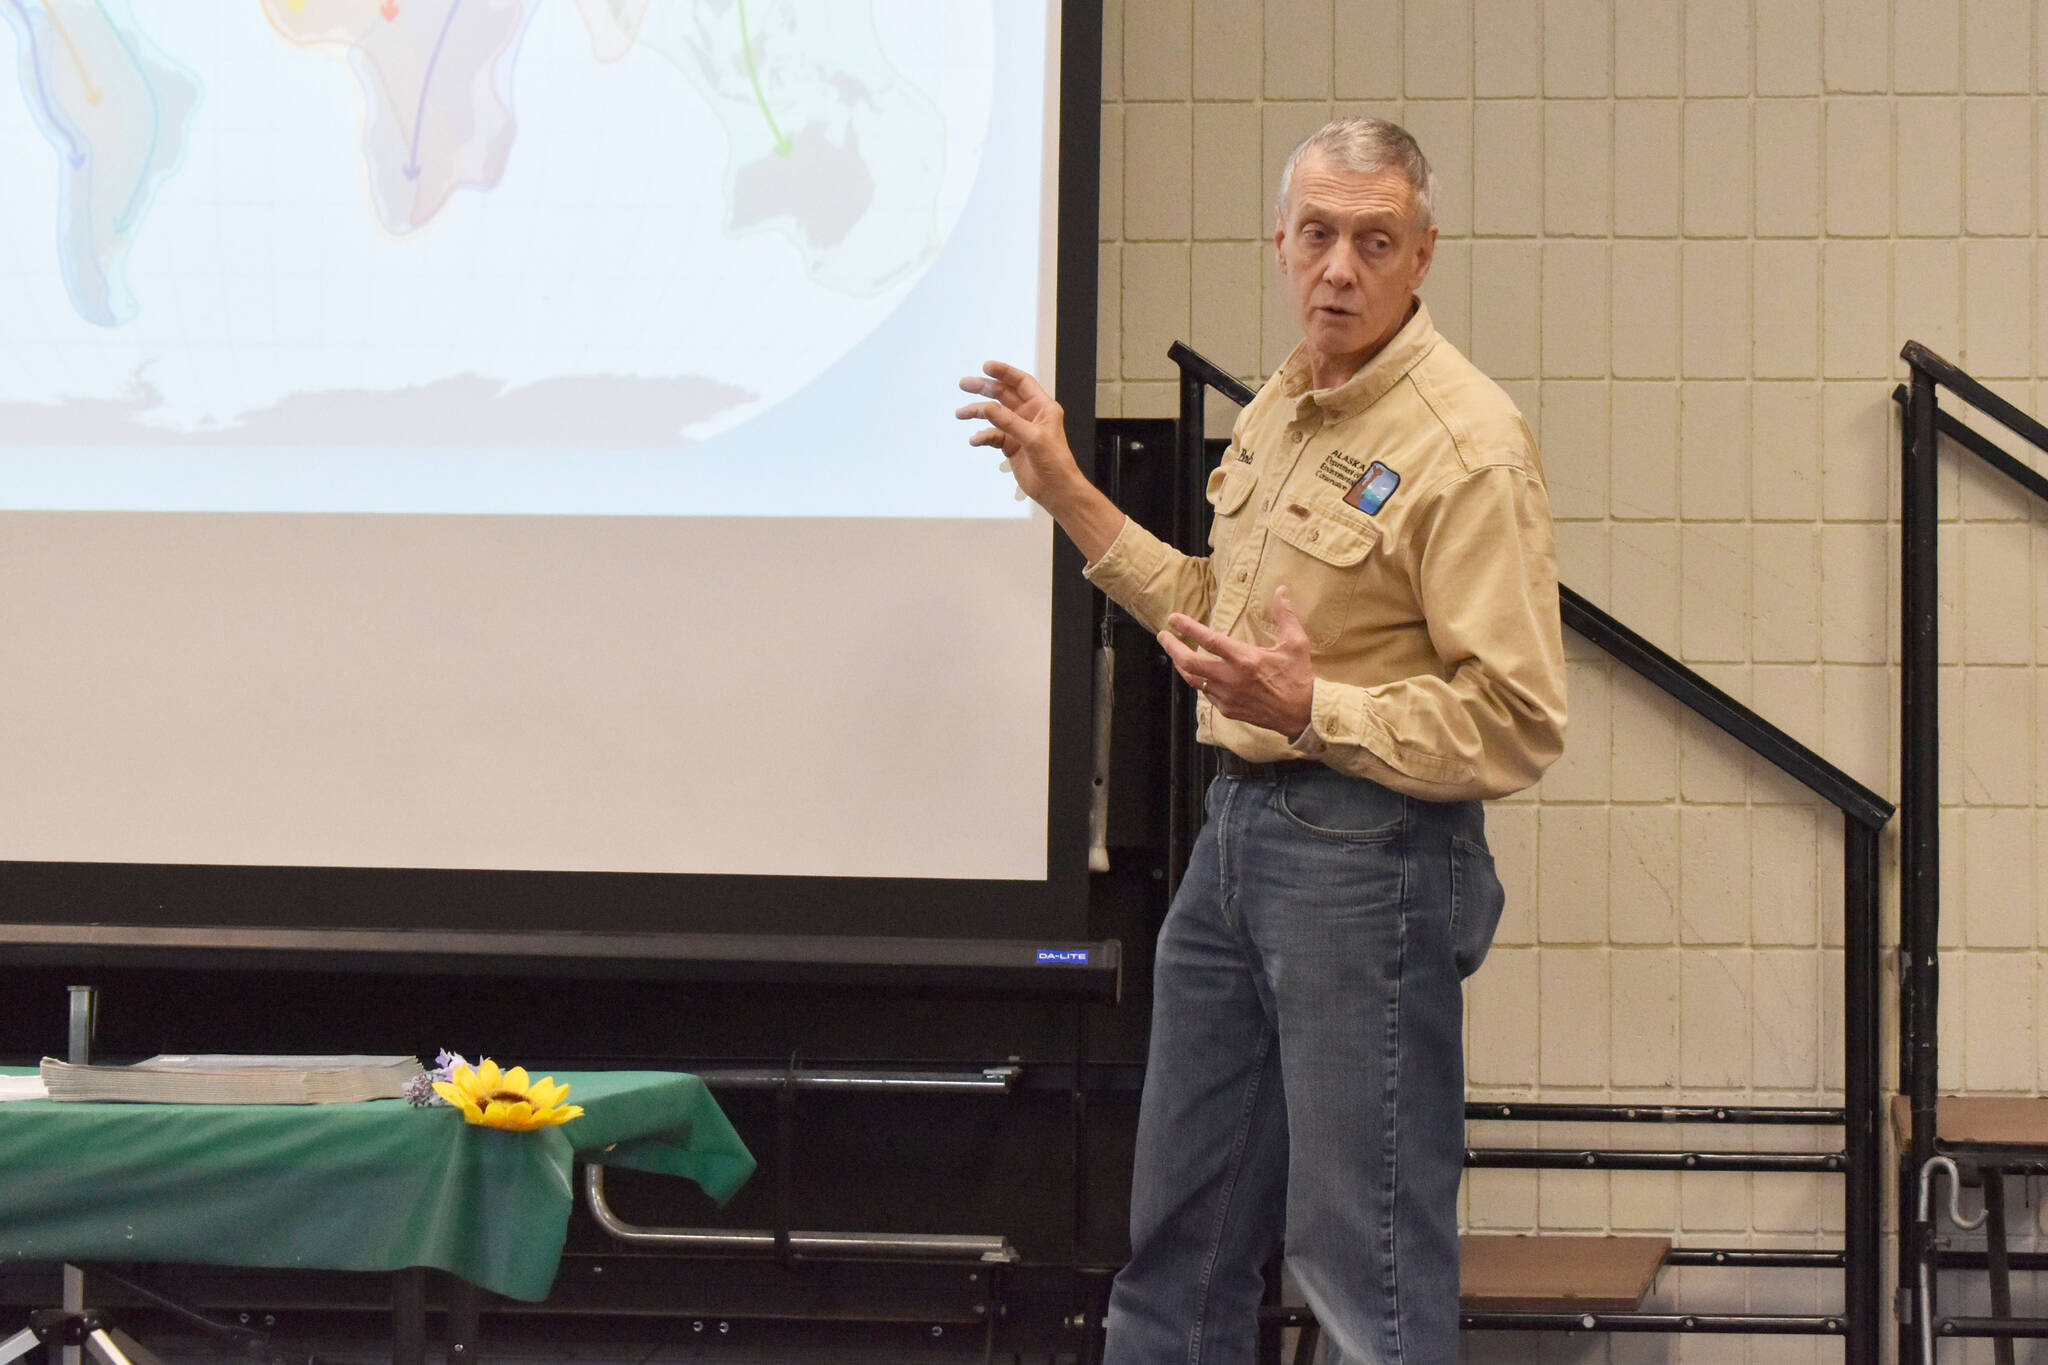 Alaska State Veterinarian Dr. Bob Gerlach gives a presentation on Avian Influenza Virus at the 4-H Agriculture Expo in Soldotna, Alaska on Aug. 5, 2022. (Jake Dye/Peninsula Clarion)